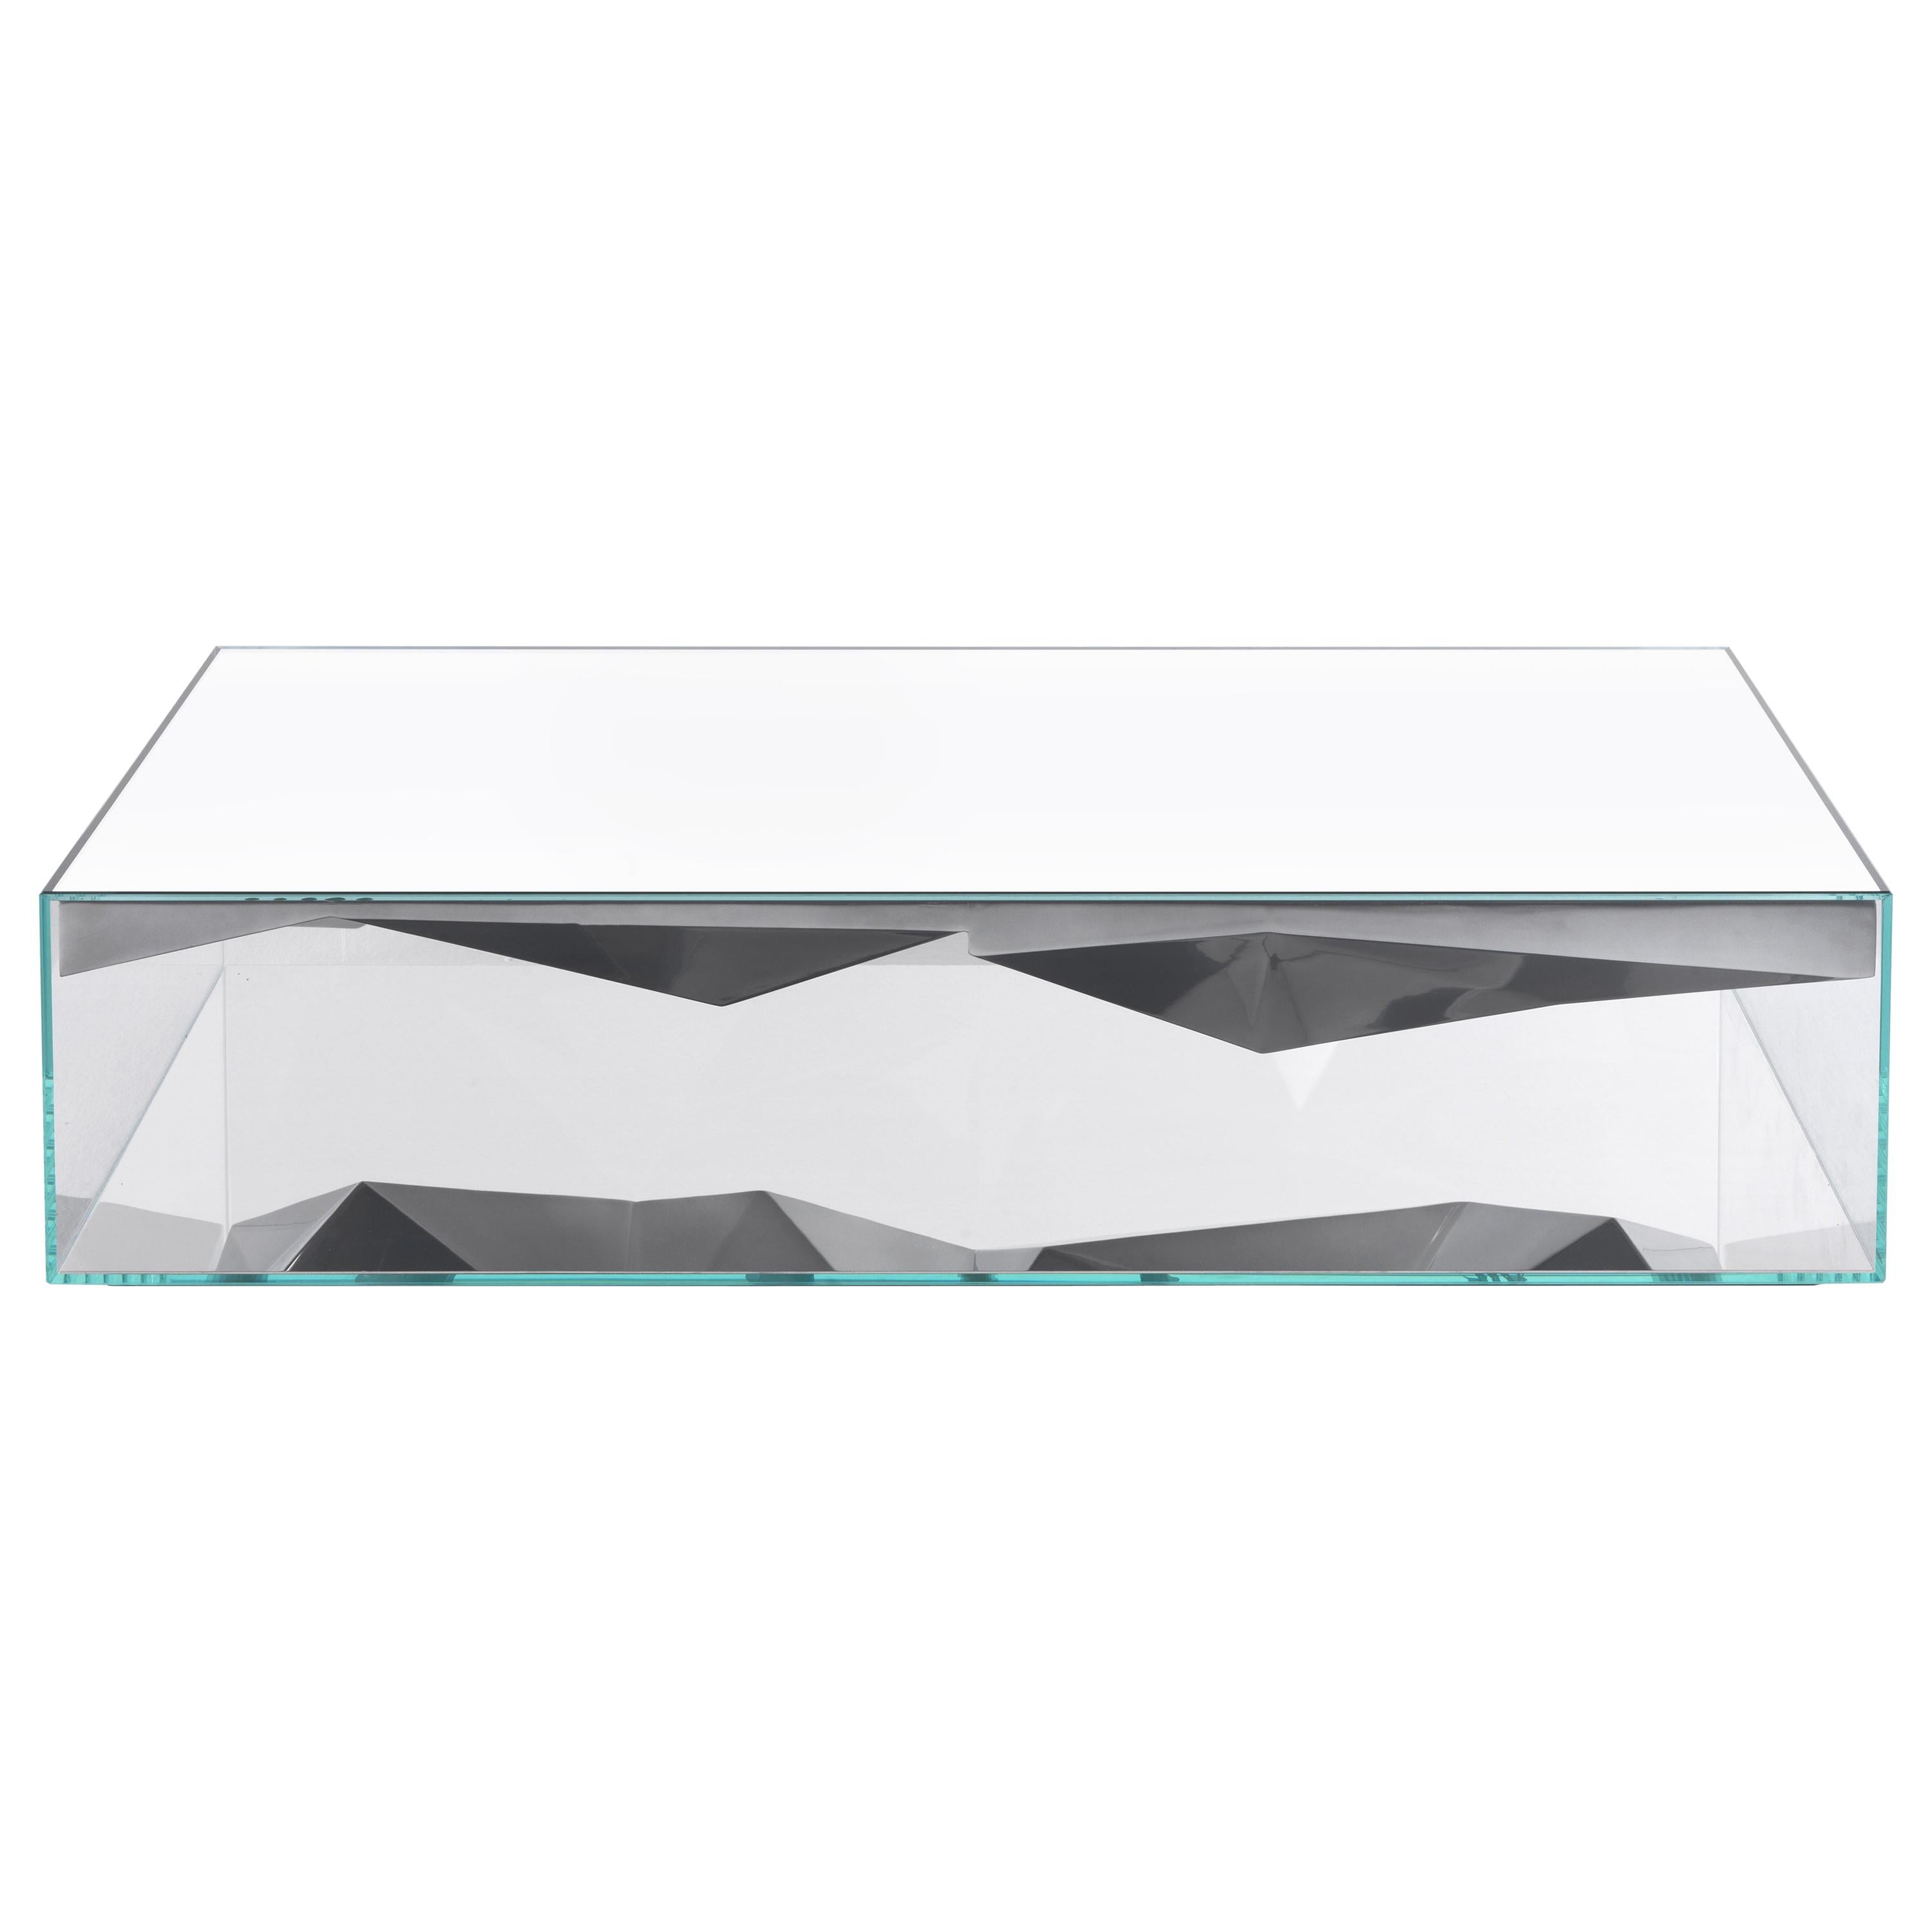 21st Century Dolmlod ‘Rectangular’ Central Table in Glass and Mirror by CTRLZAK